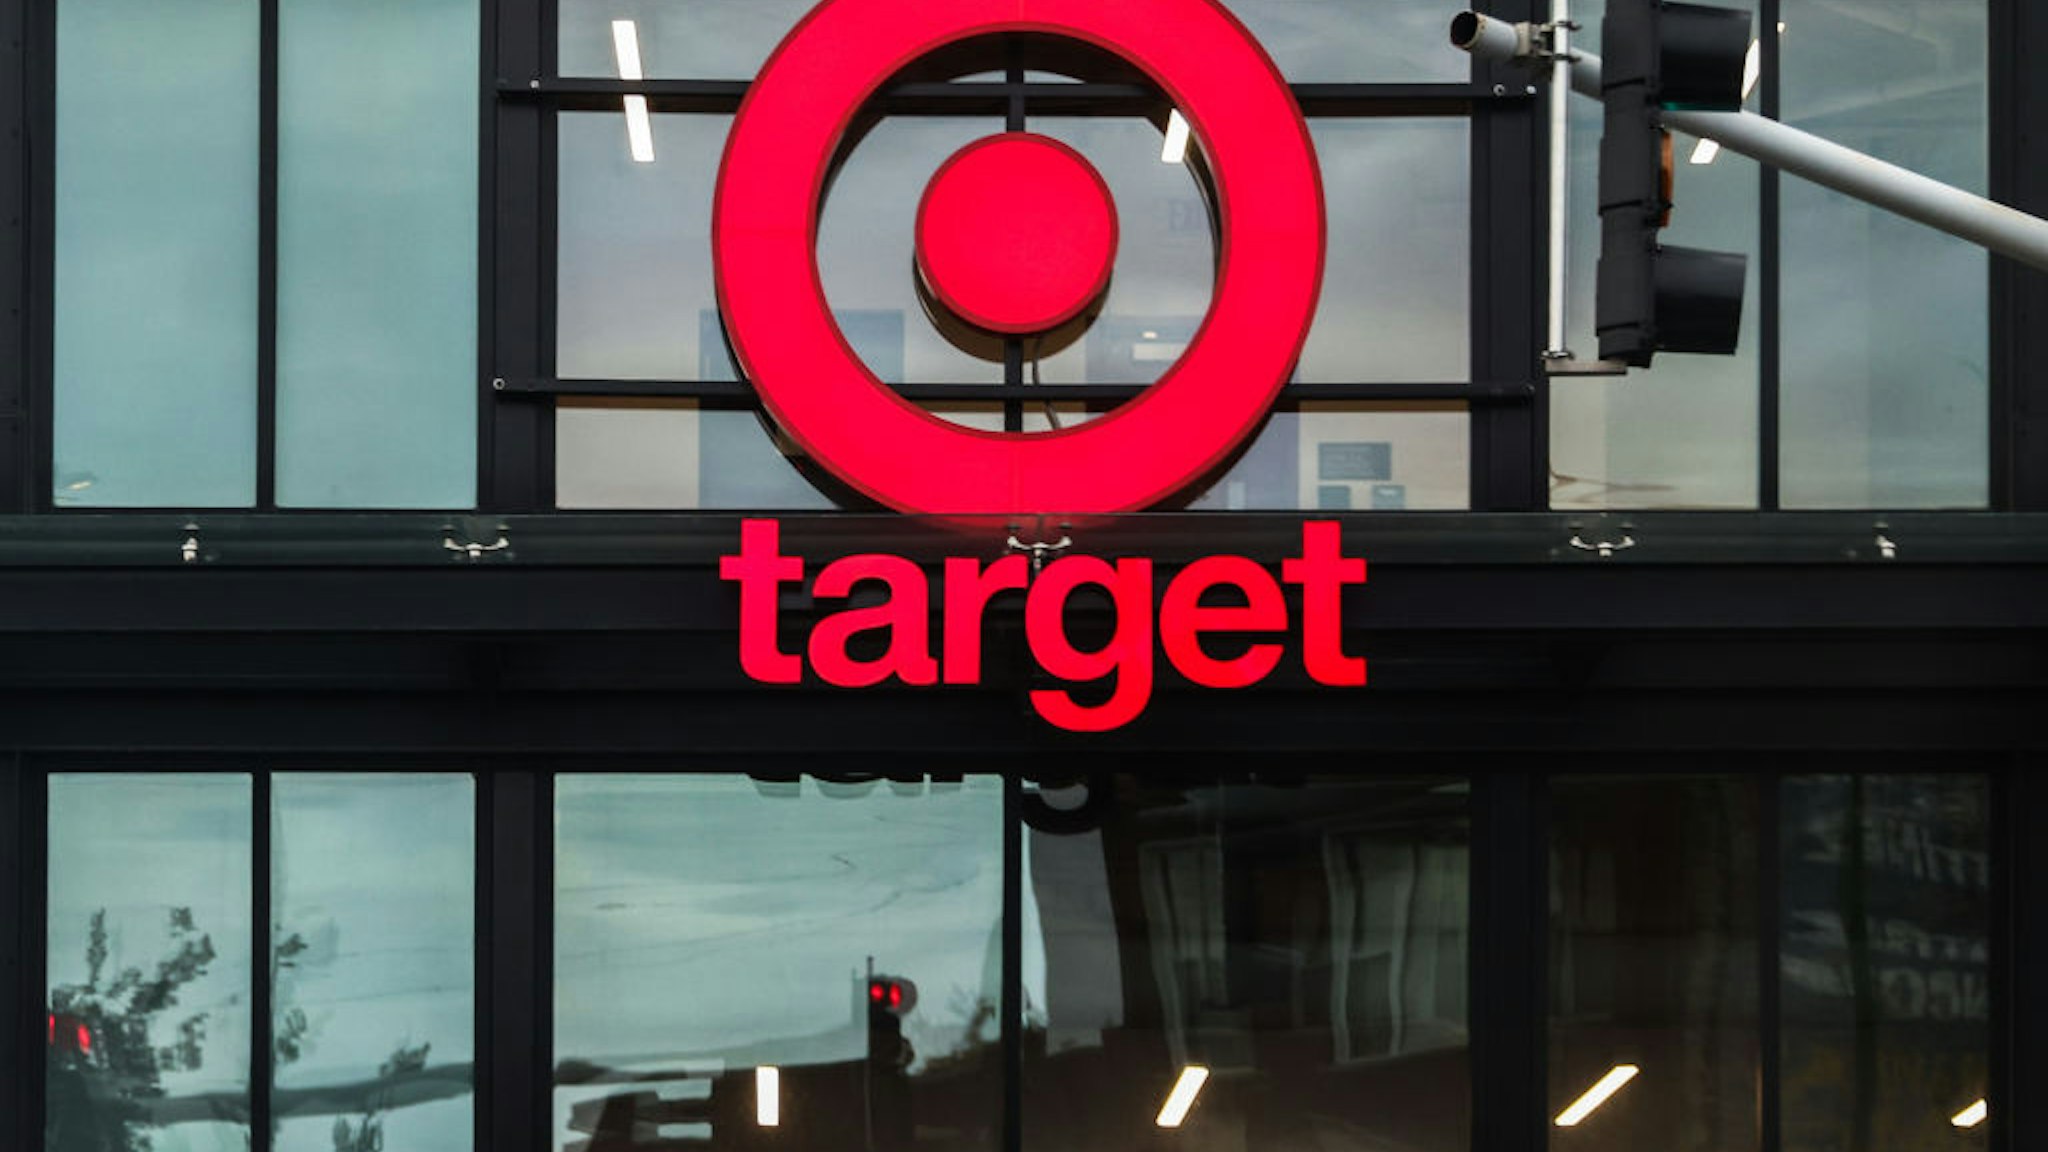 Target store logo sign is seen on a building in Chicago, Illinois, United States, on October 16, 2022. (Photo by Beata Zawrzel/NurPhoto via Getty Images)